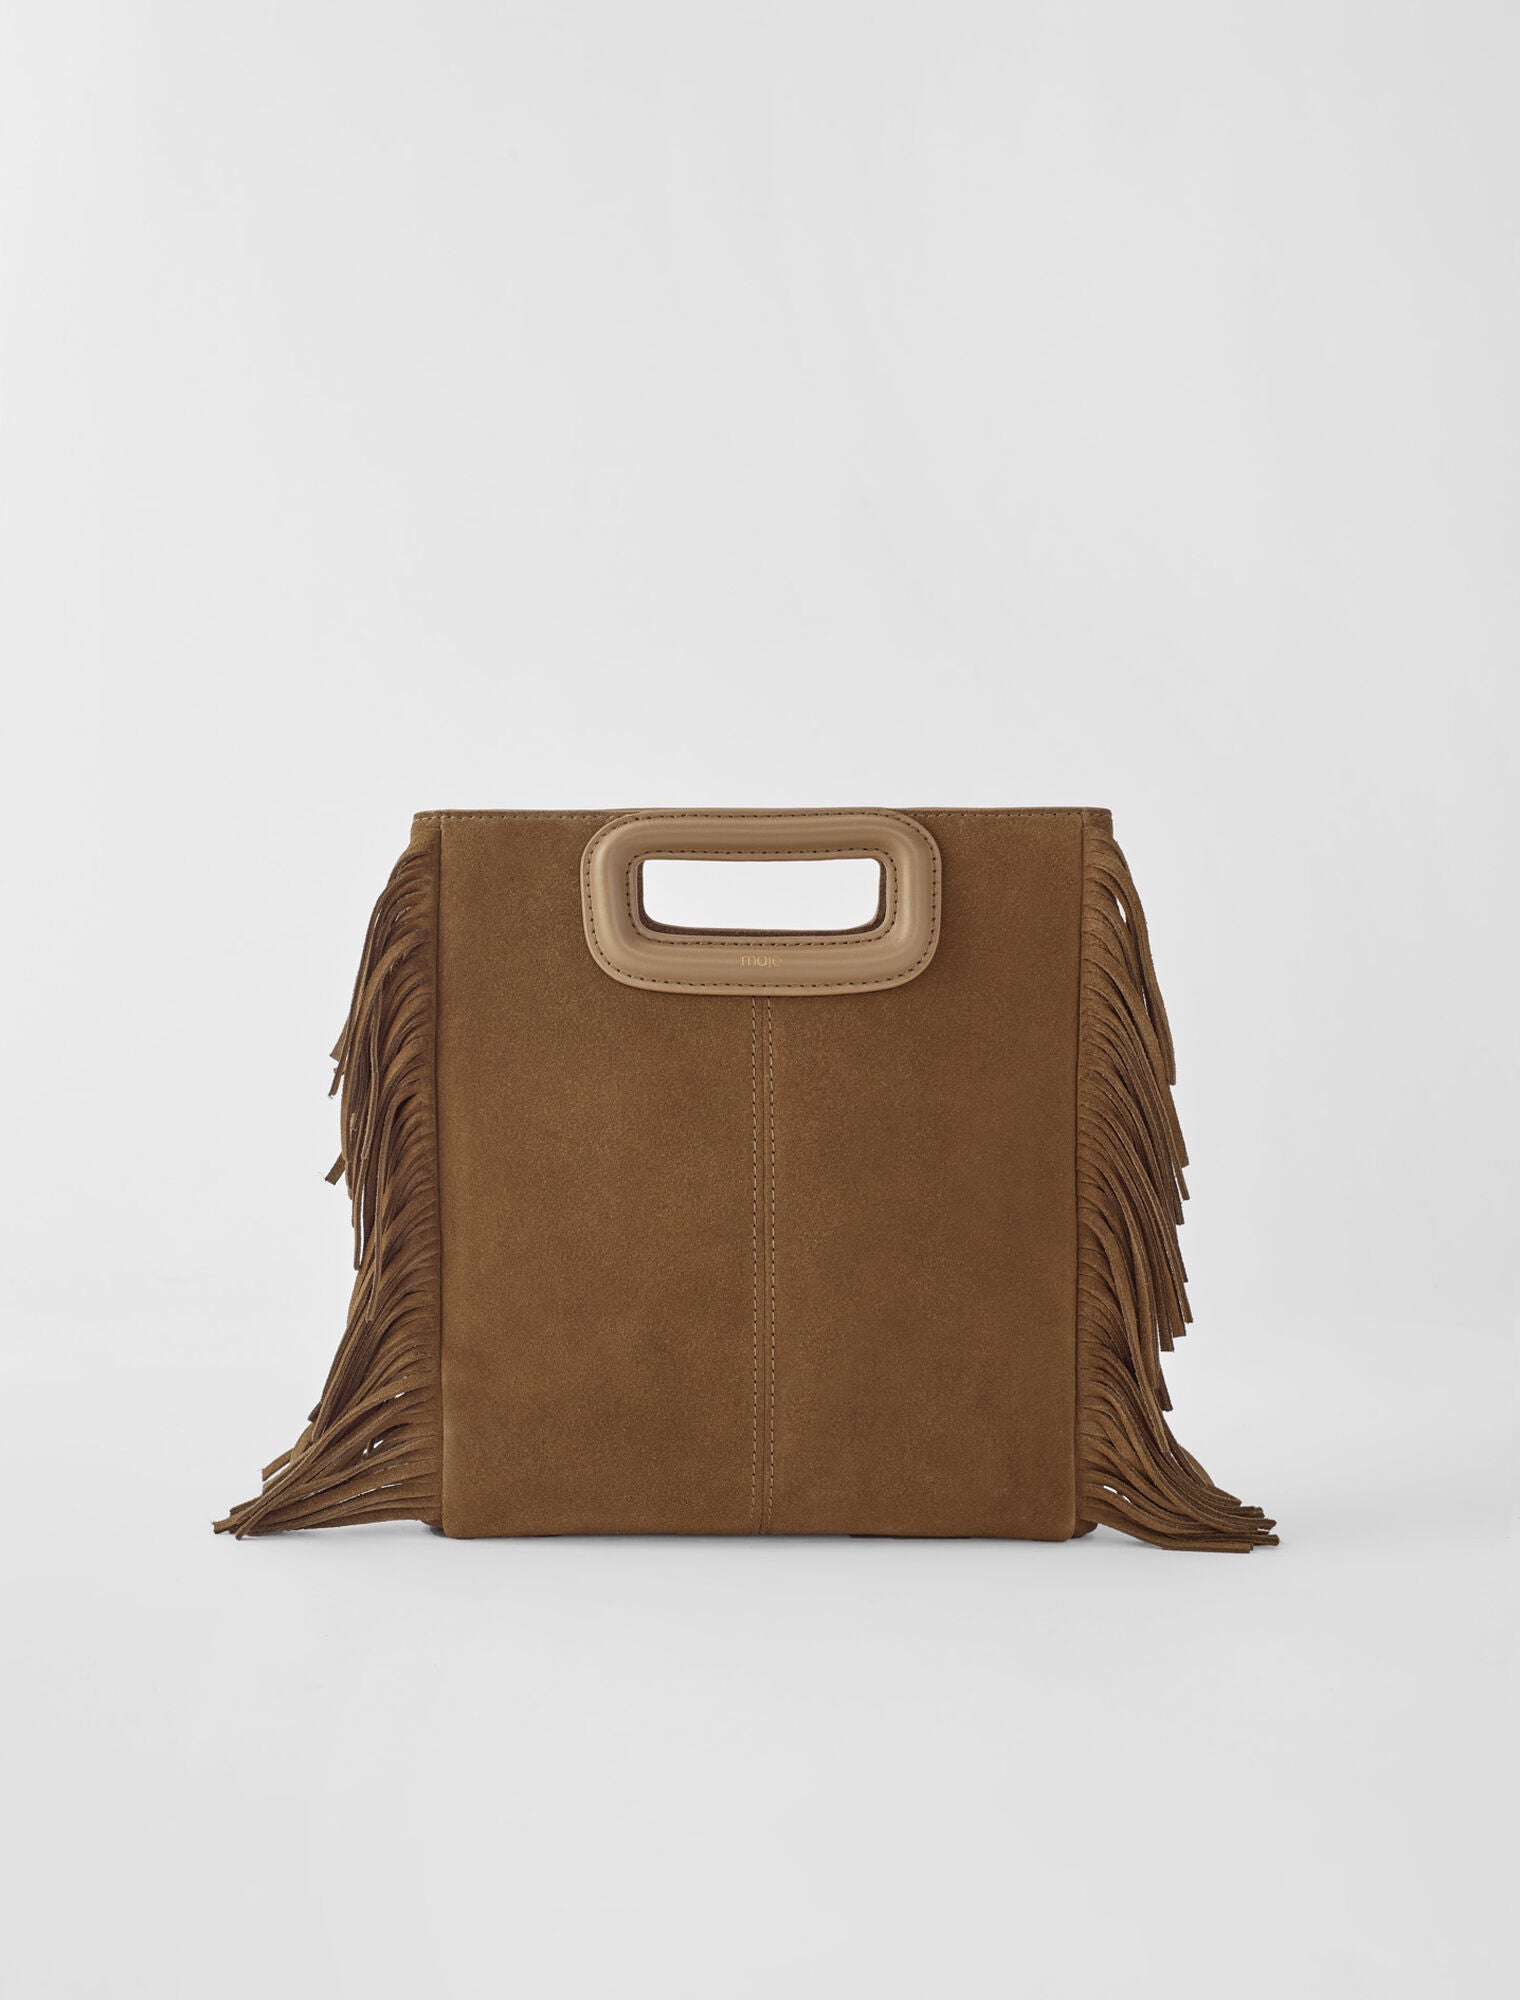 Camel-featured-Fringed M bag in suede